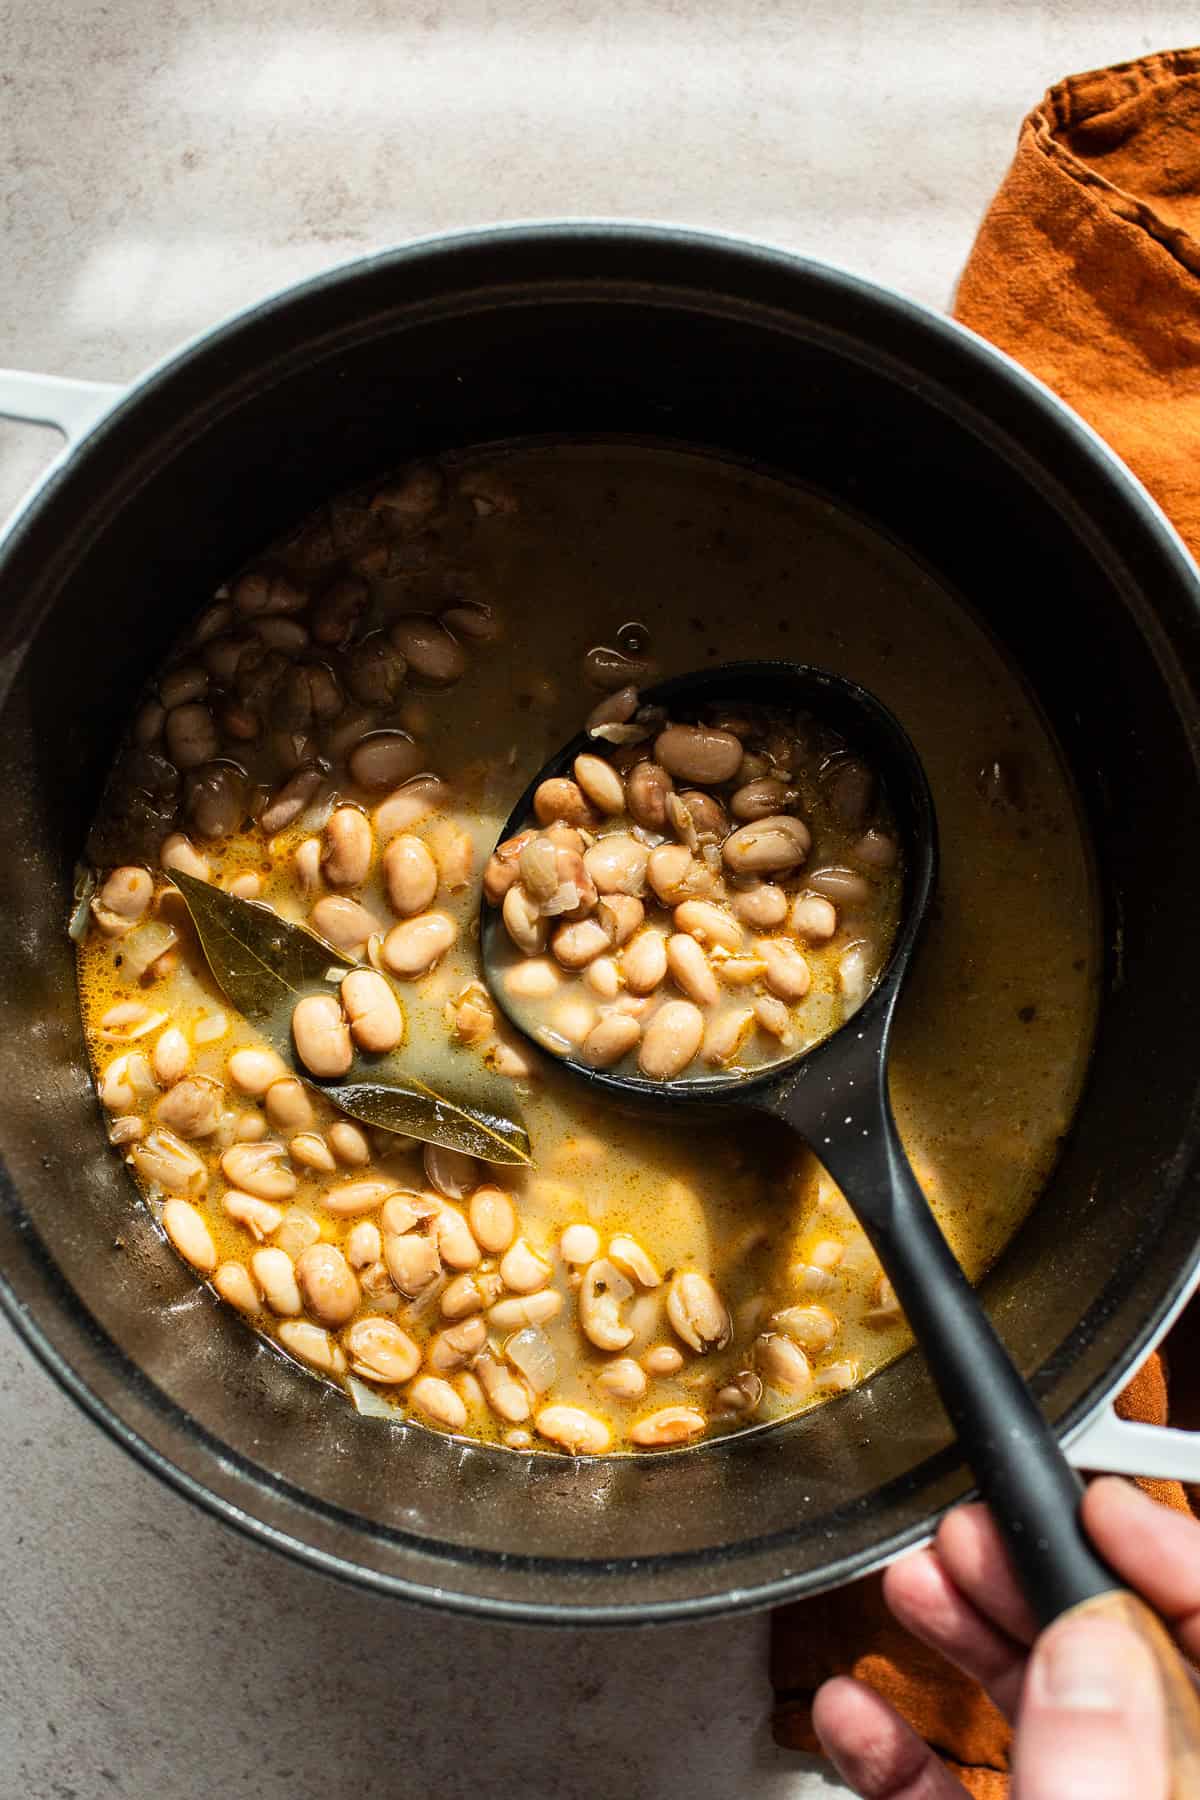 Pinto beans cooked in a pot